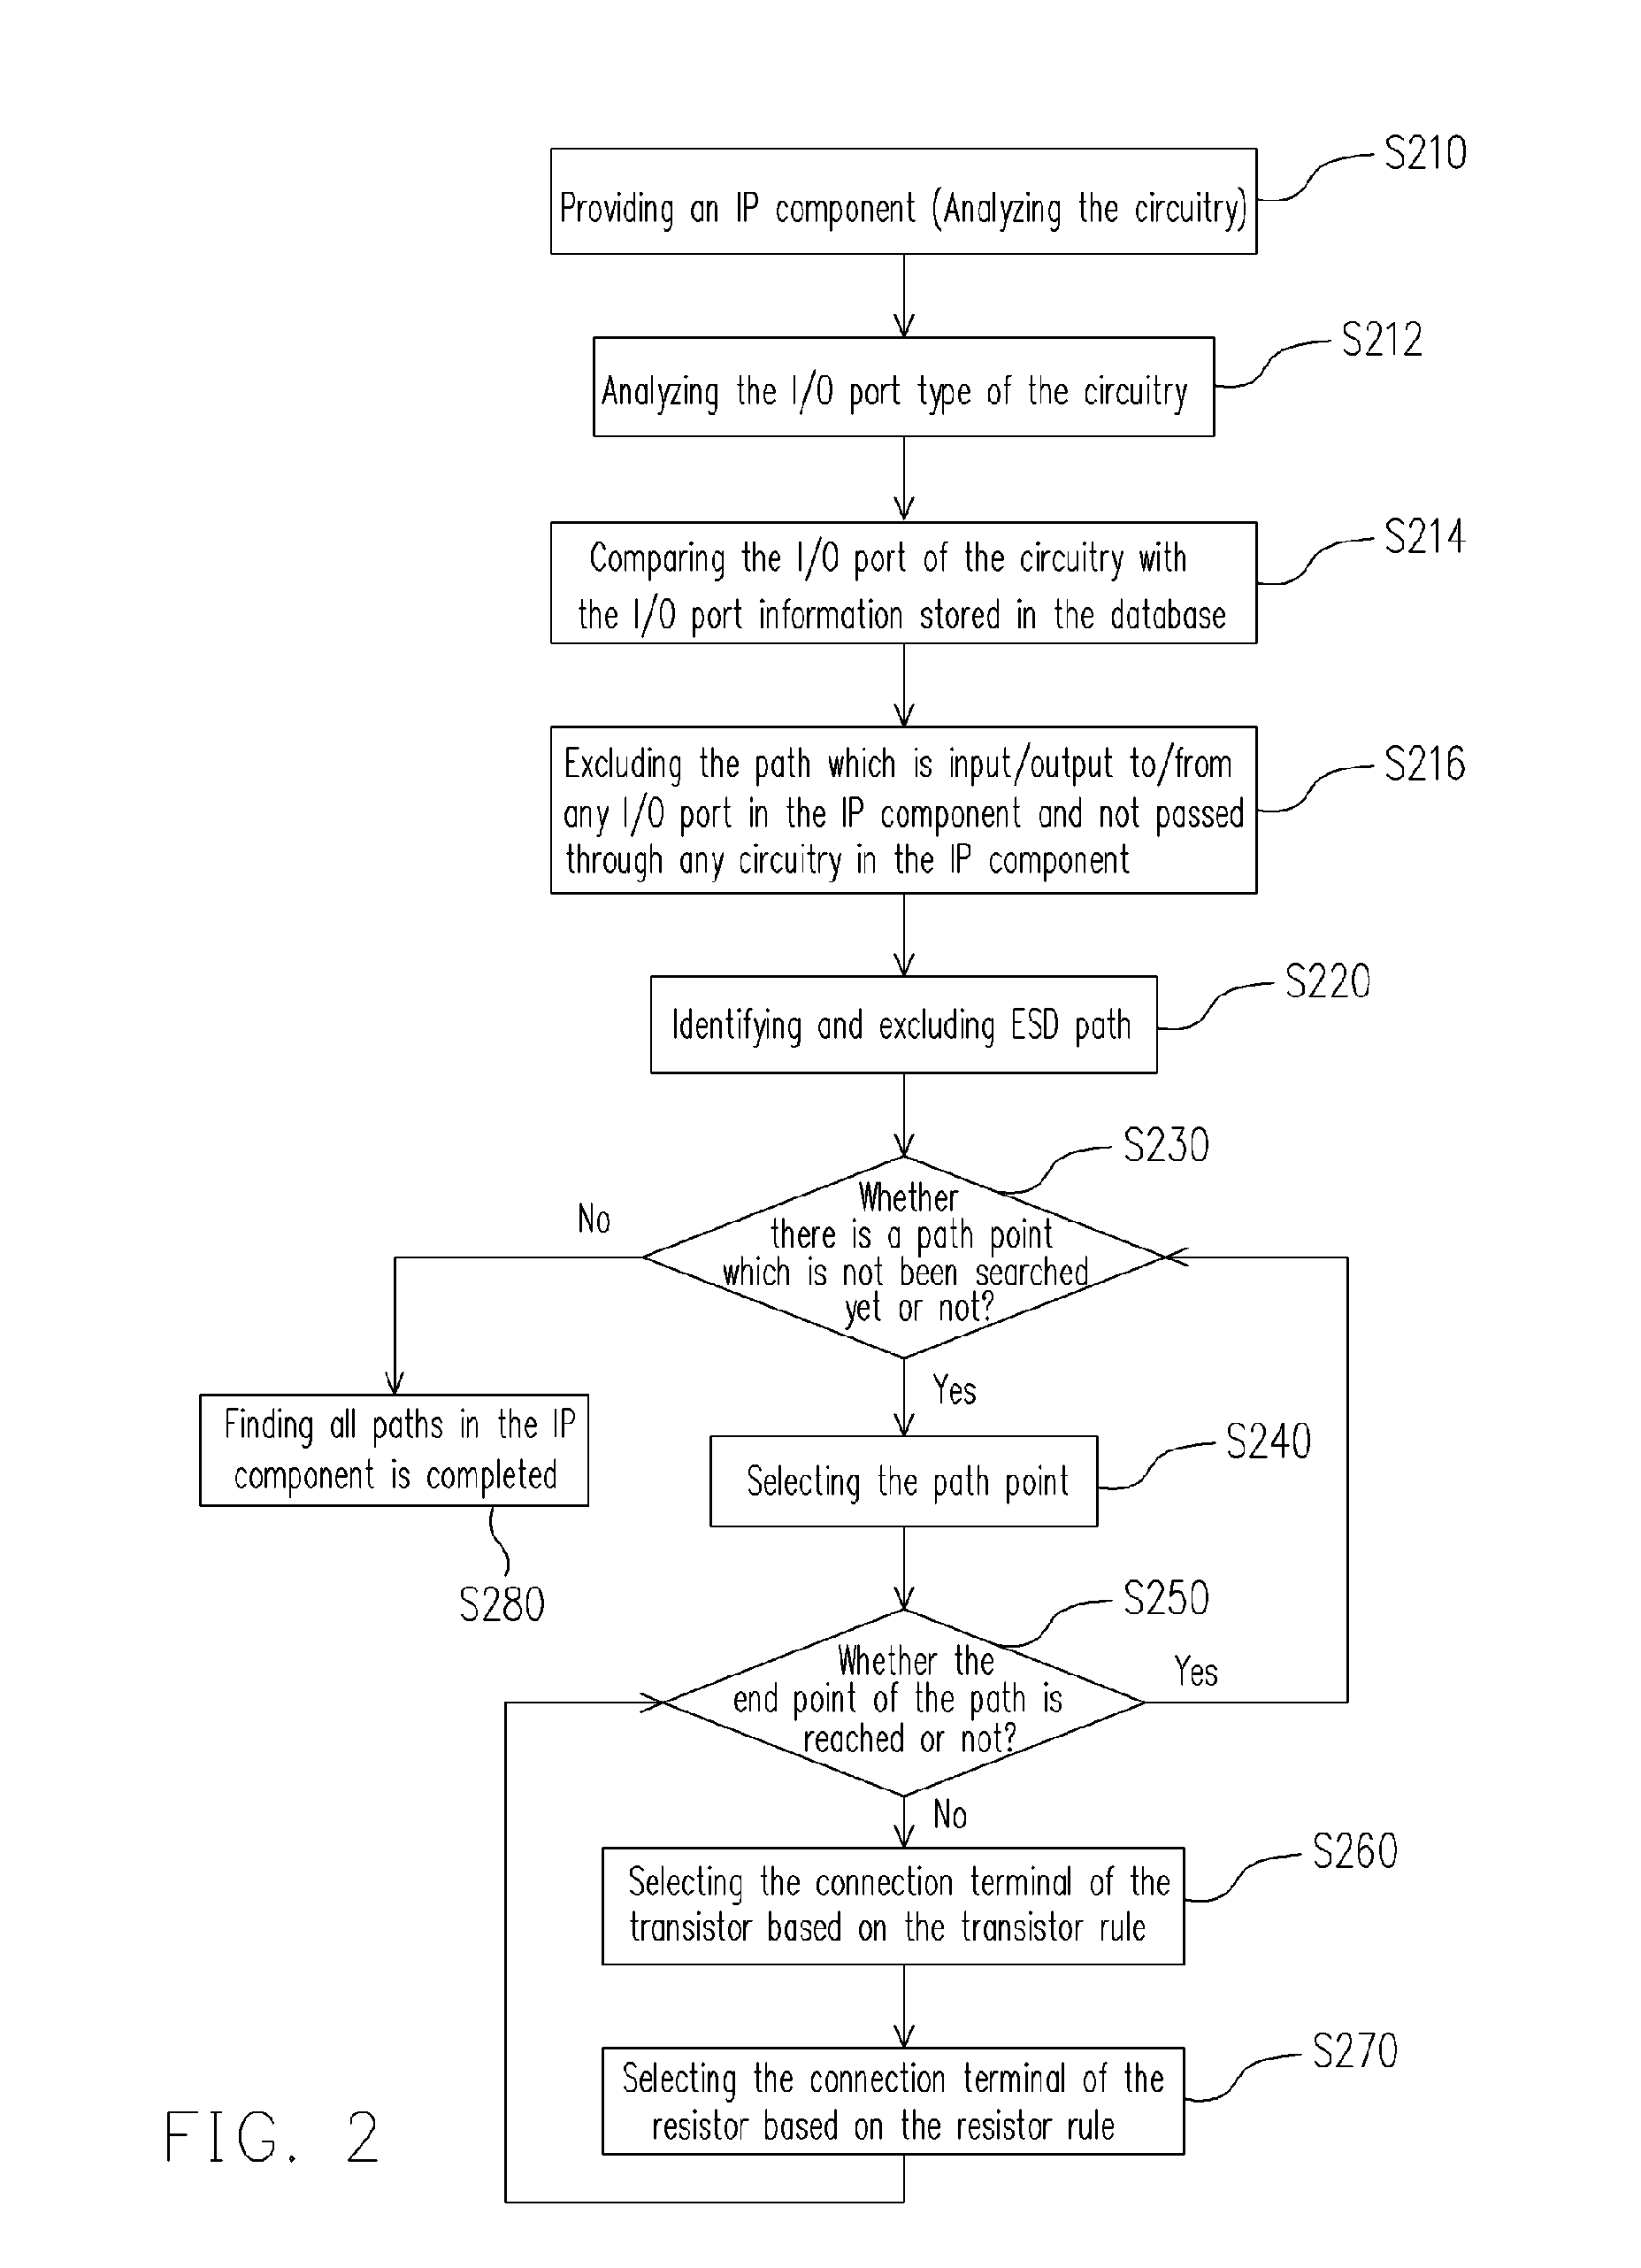 Method for IP characterization and path finding, and computer readable recording medium for storing program thereof